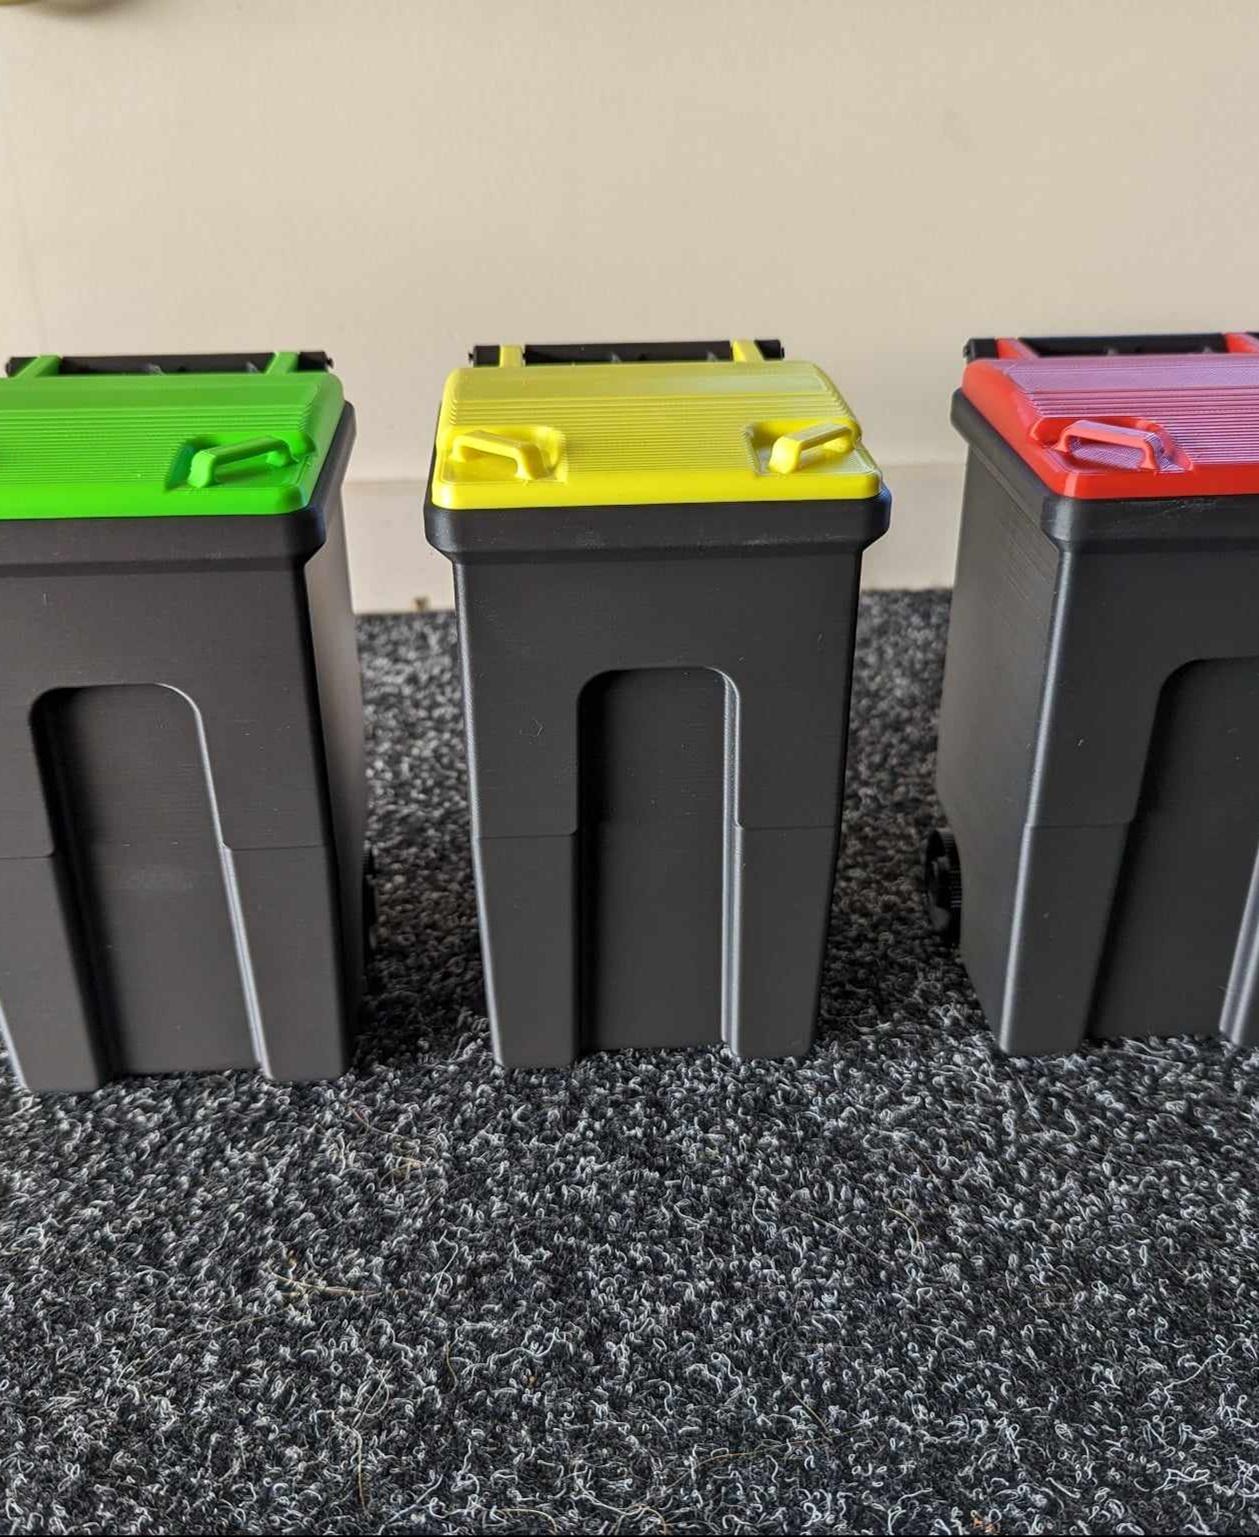 Mini Recycle Bin  - Here are our 3 bins, yellow is recyclable, green is green waste, and red is rubbish. - 3d model